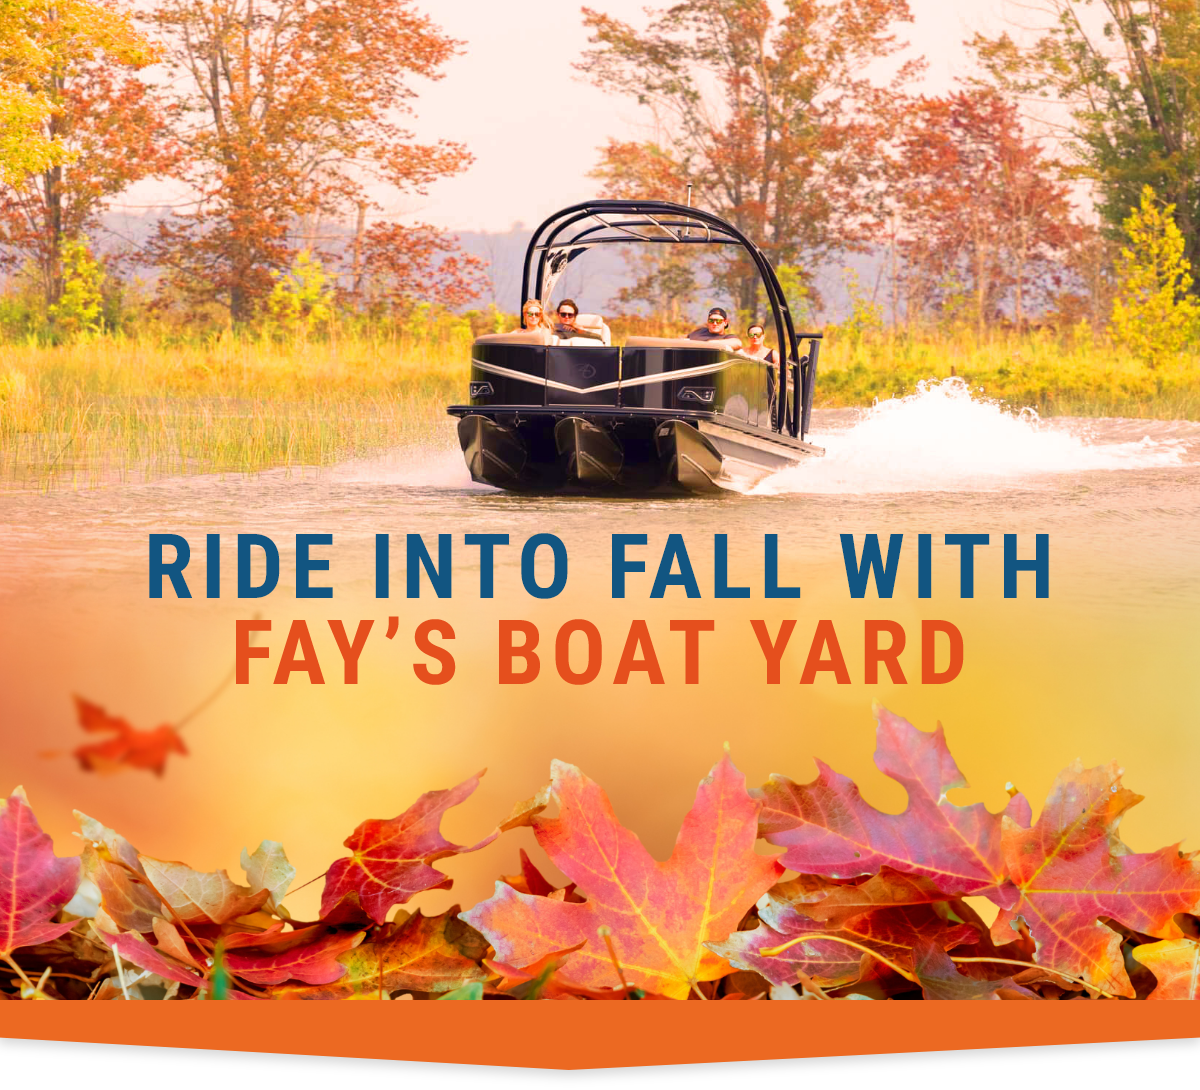 Ride İnto Fall With Fay's Boat Yard